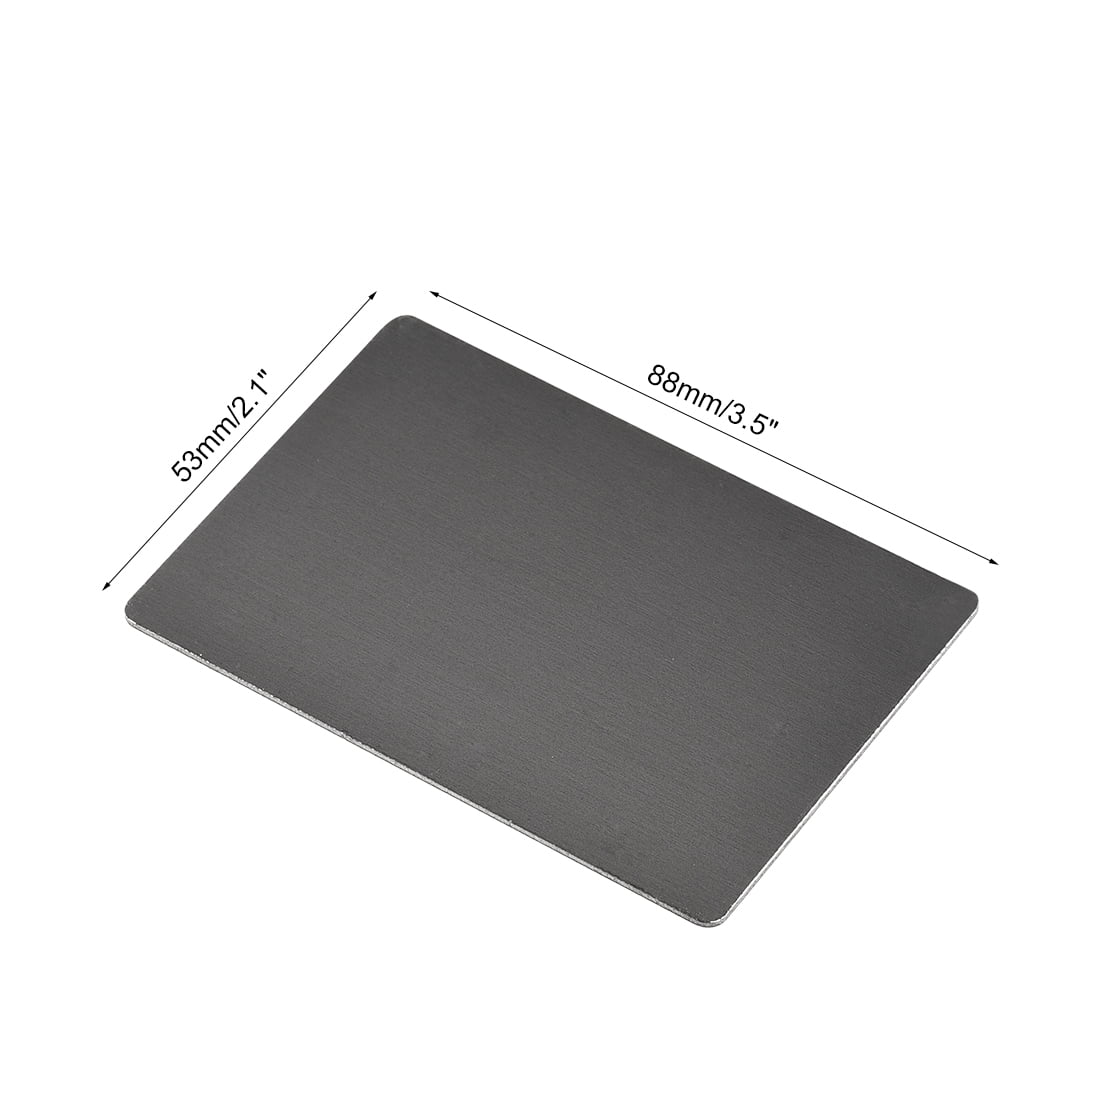 uxcell Blank Metal Card 66x45x0.3mm Painted Aluminum Plate for DIY Laser Printing Engraving Black 10 Pcs